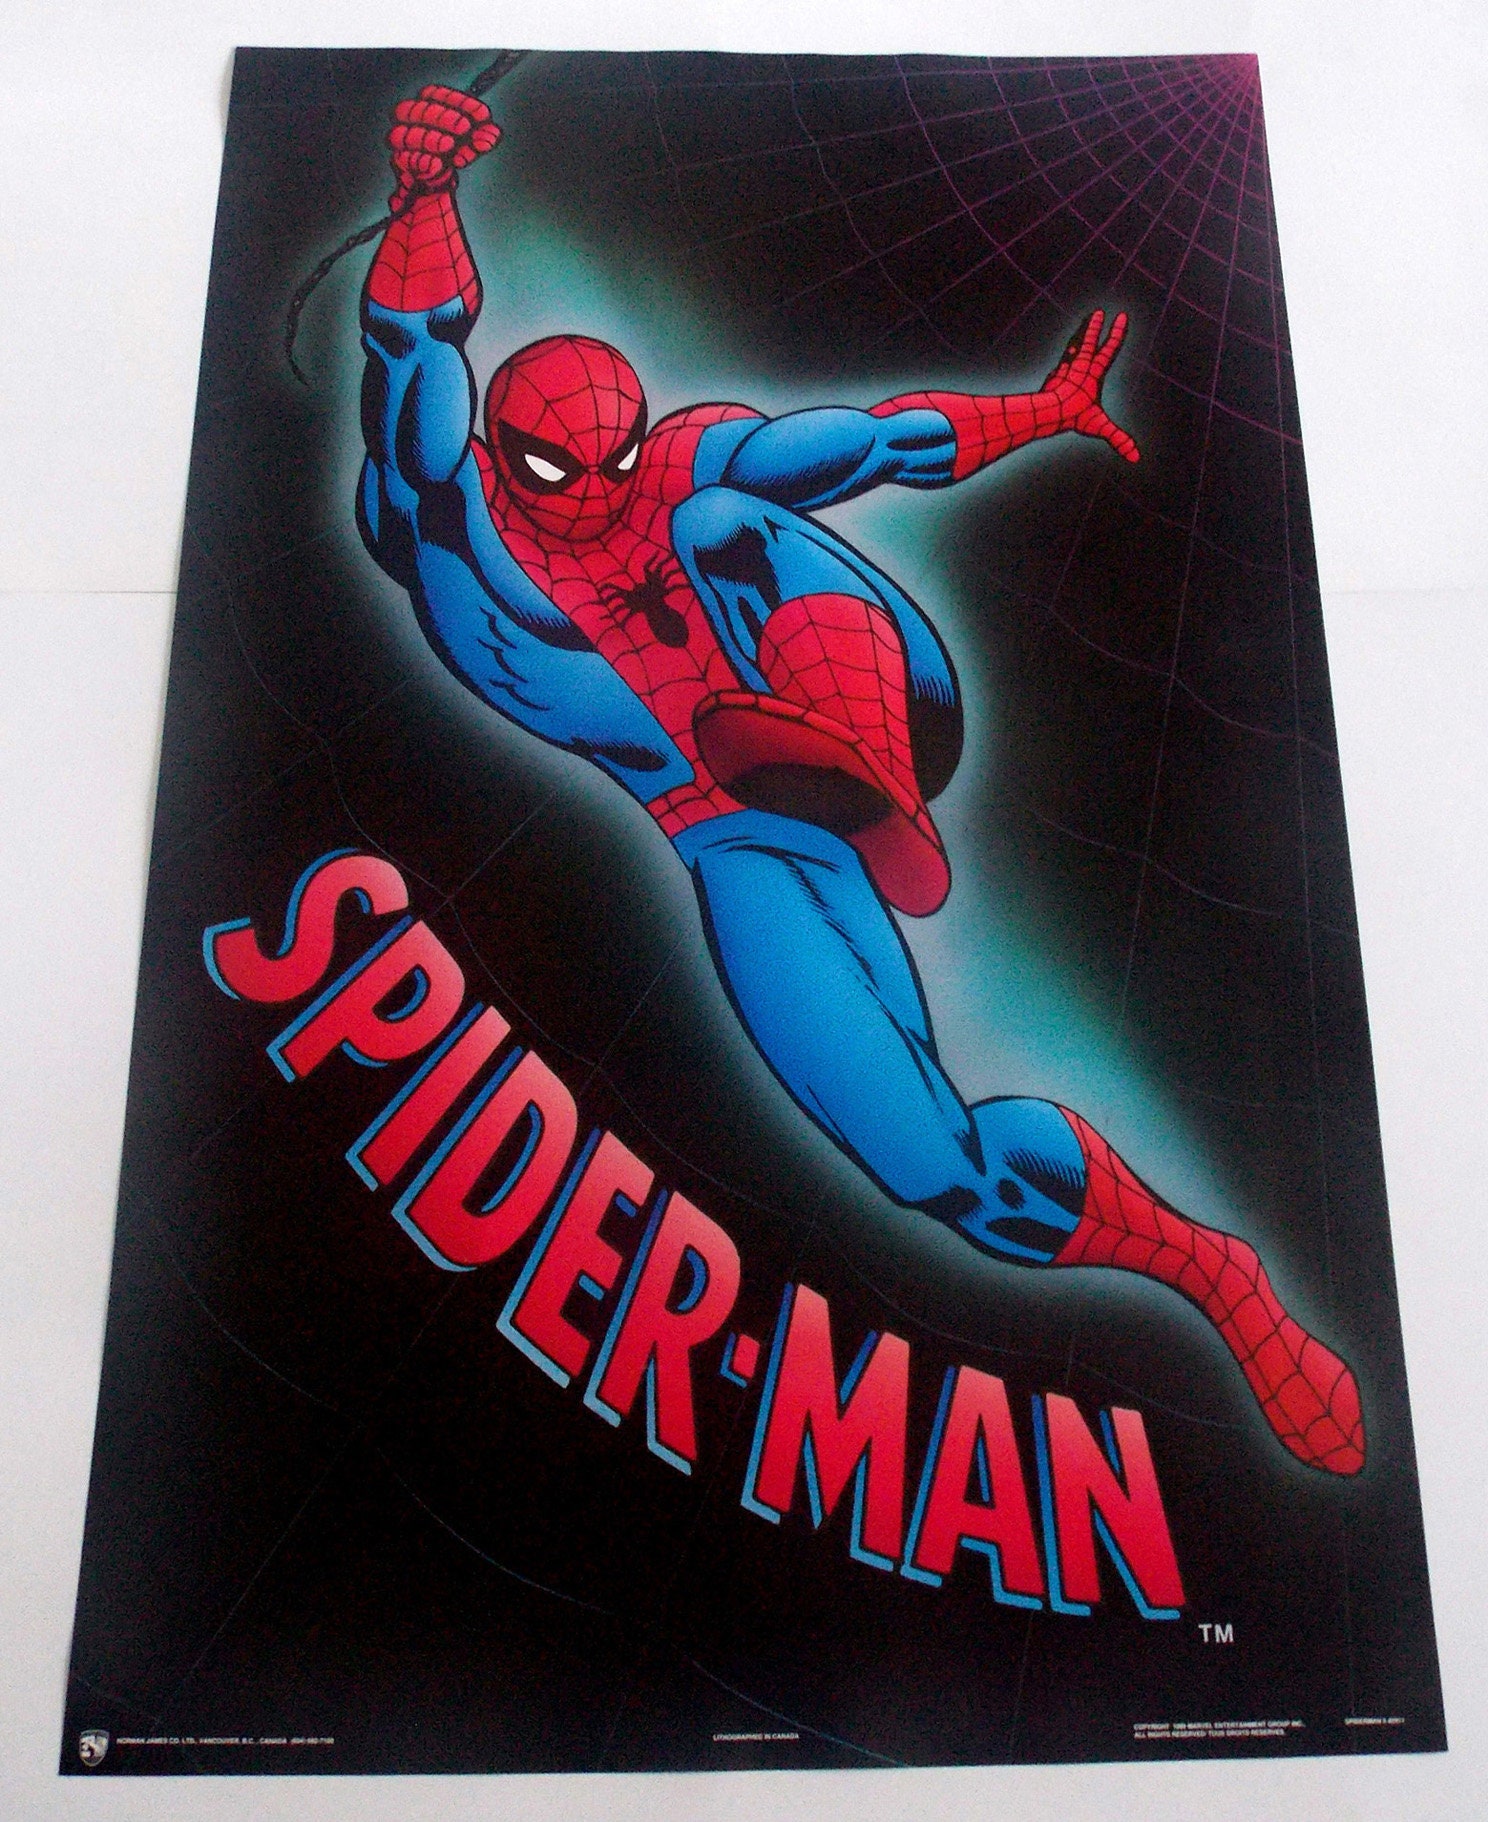 SPIDERMAN POSTER From 1989, Marvel Comics, Vintage and Rare - Etsy ...